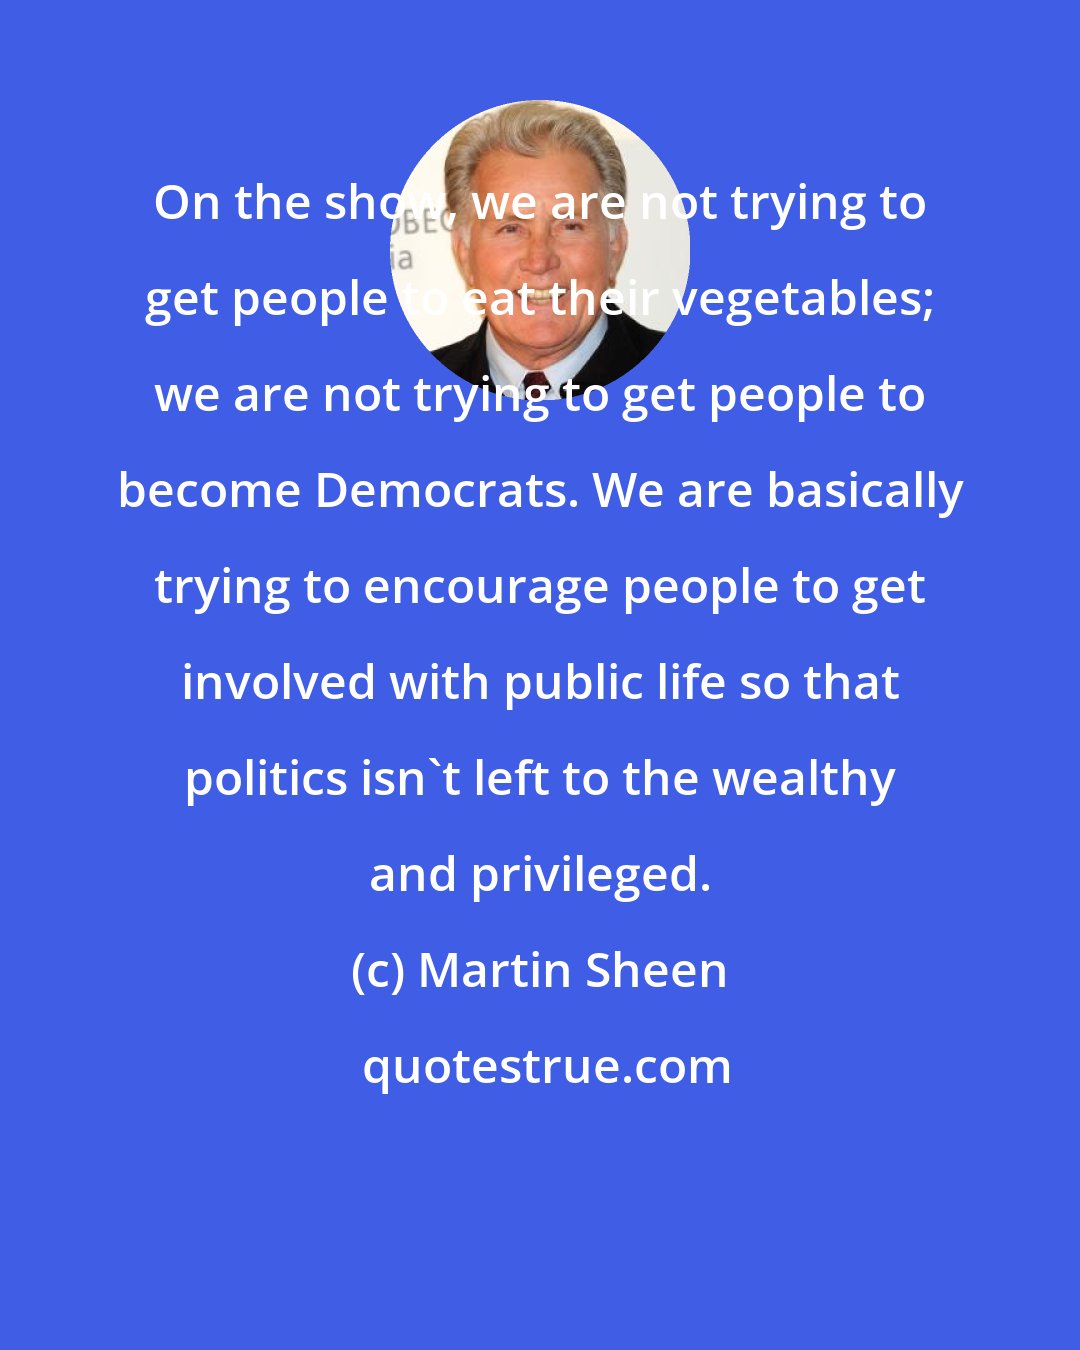 Martin Sheen: On the show, we are not trying to get people to eat their vegetables; we are not trying to get people to become Democrats. We are basically trying to encourage people to get involved with public life so that politics isn't left to the wealthy and privileged.